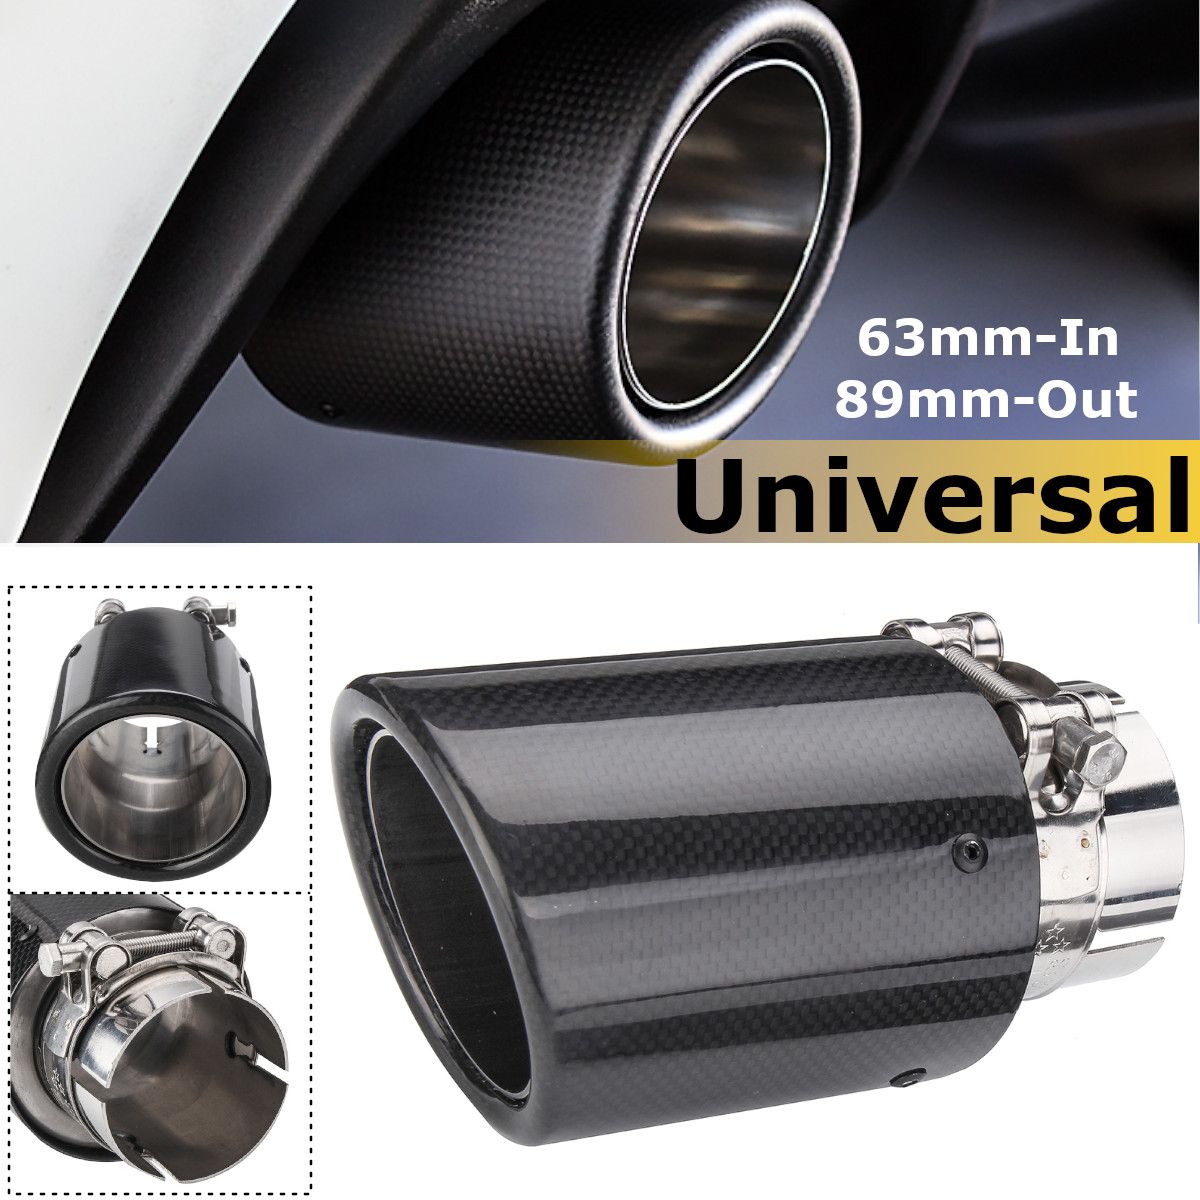 2Inch-Exhaust-Tip-Pipe-Out-Muffler-Tip-Universal-Glossy-Carbon-Fiber-63mm-89mm-1700139